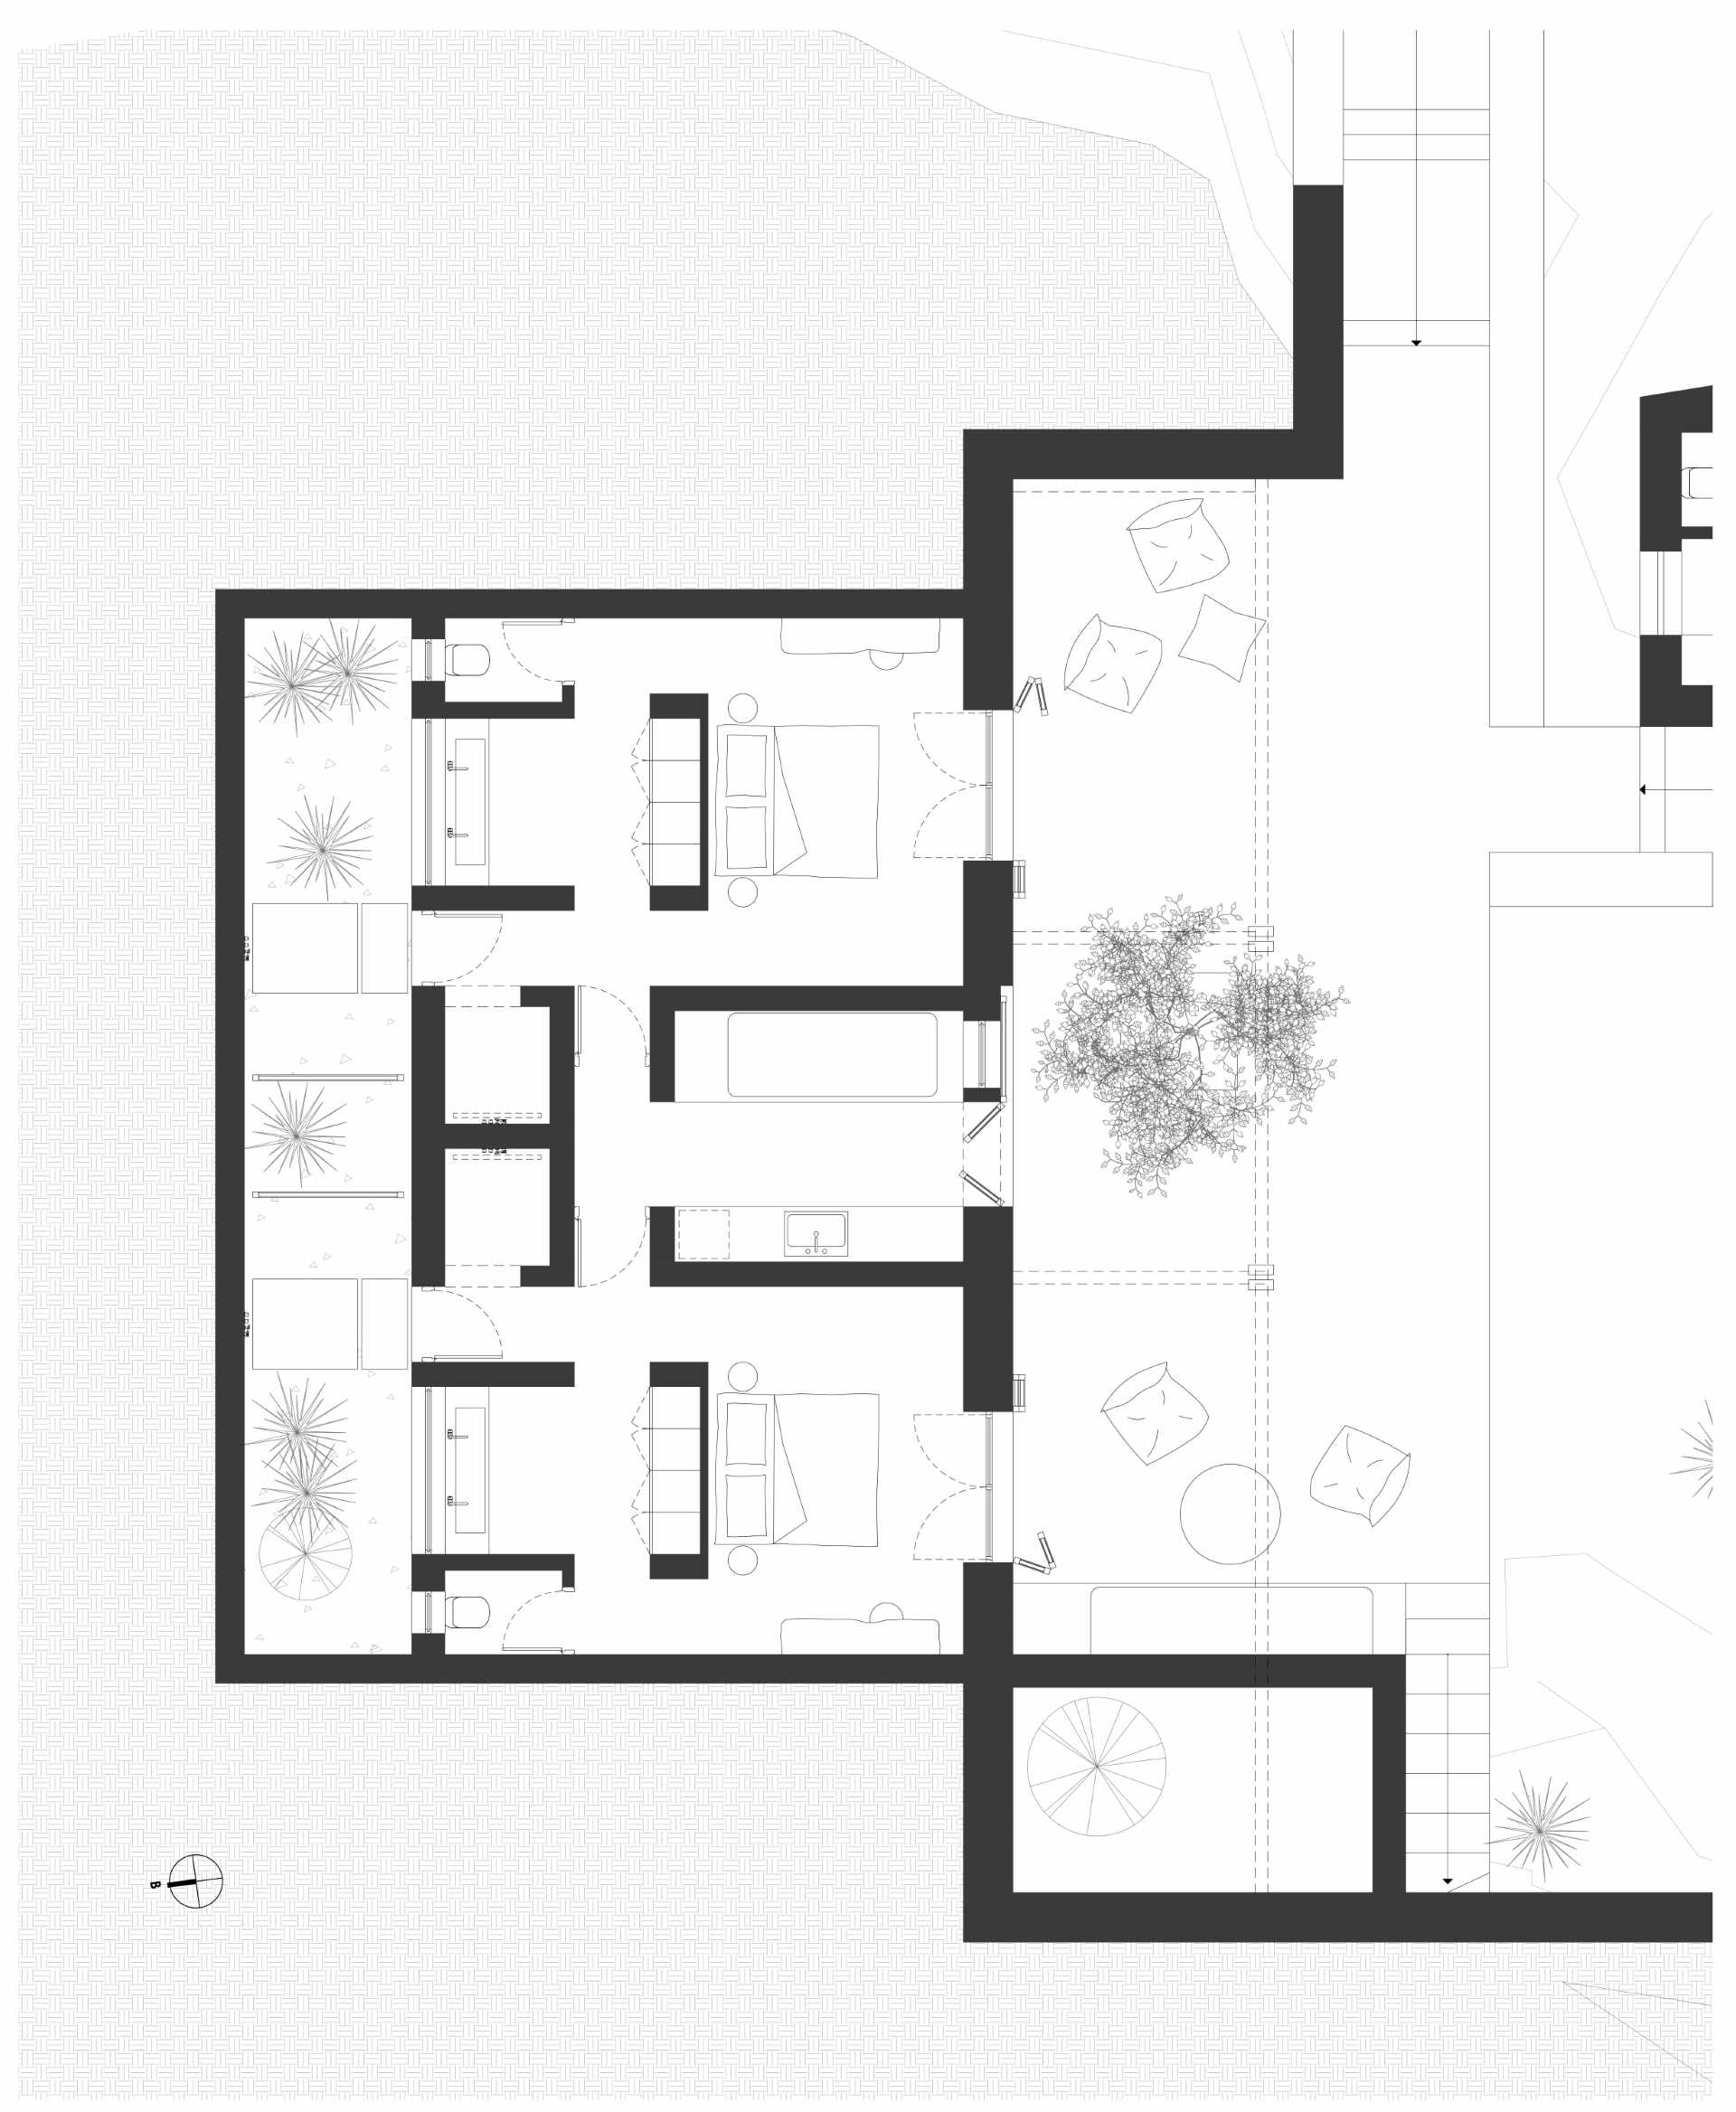 Architectural drawings for a modern house.